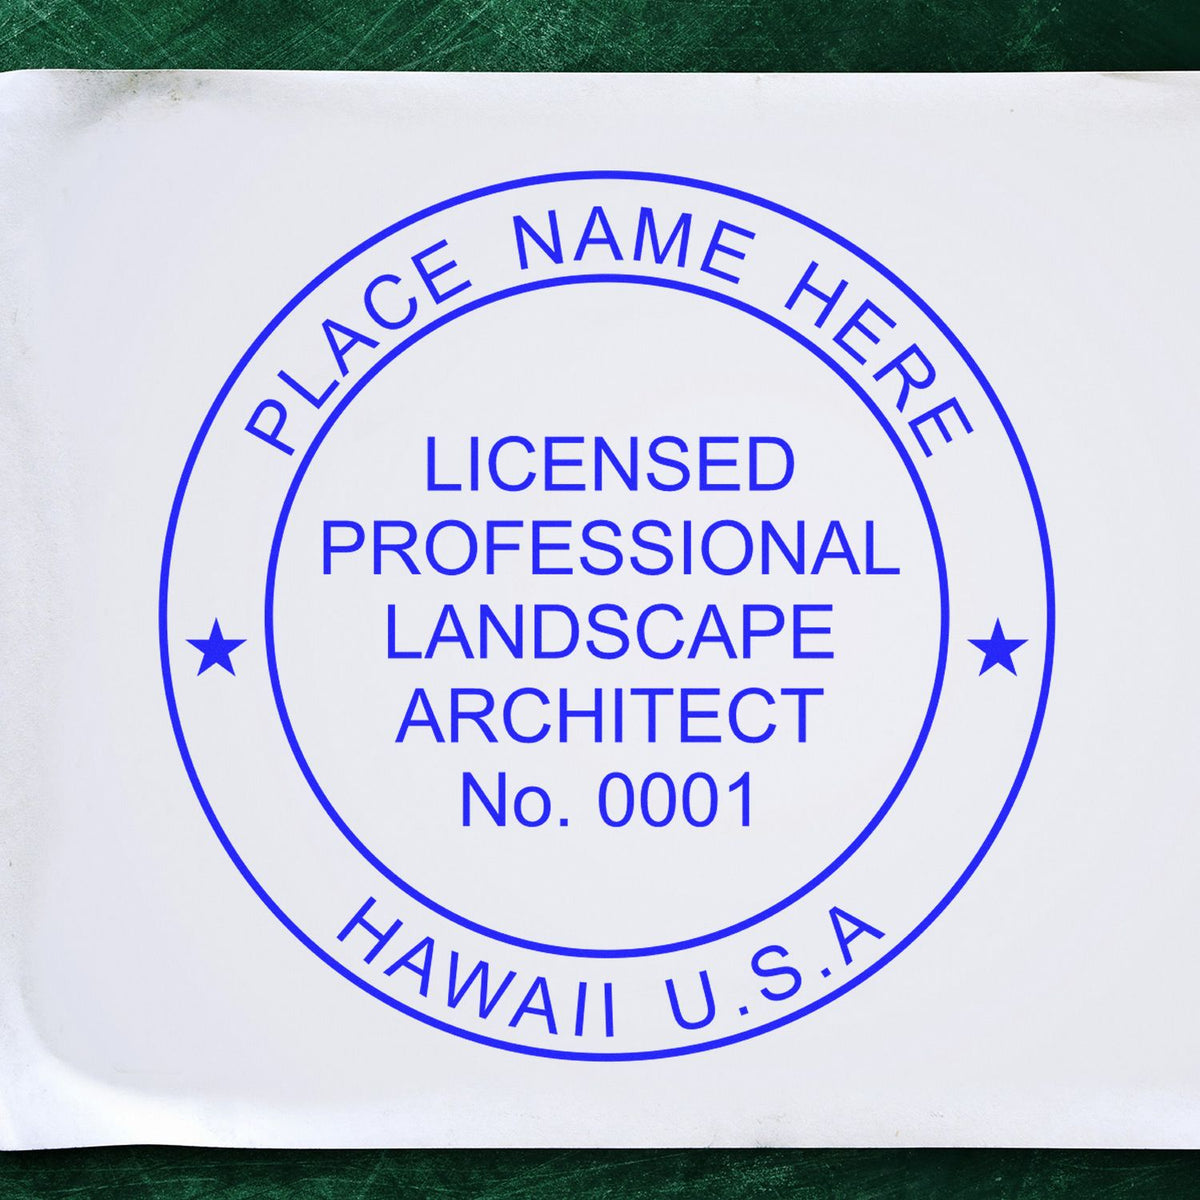 The Slim Pre-Inked Hawaii Landscape Architect Seal Stamp stamp impression comes to life with a crisp, detailed photo on paper - showcasing true professional quality.